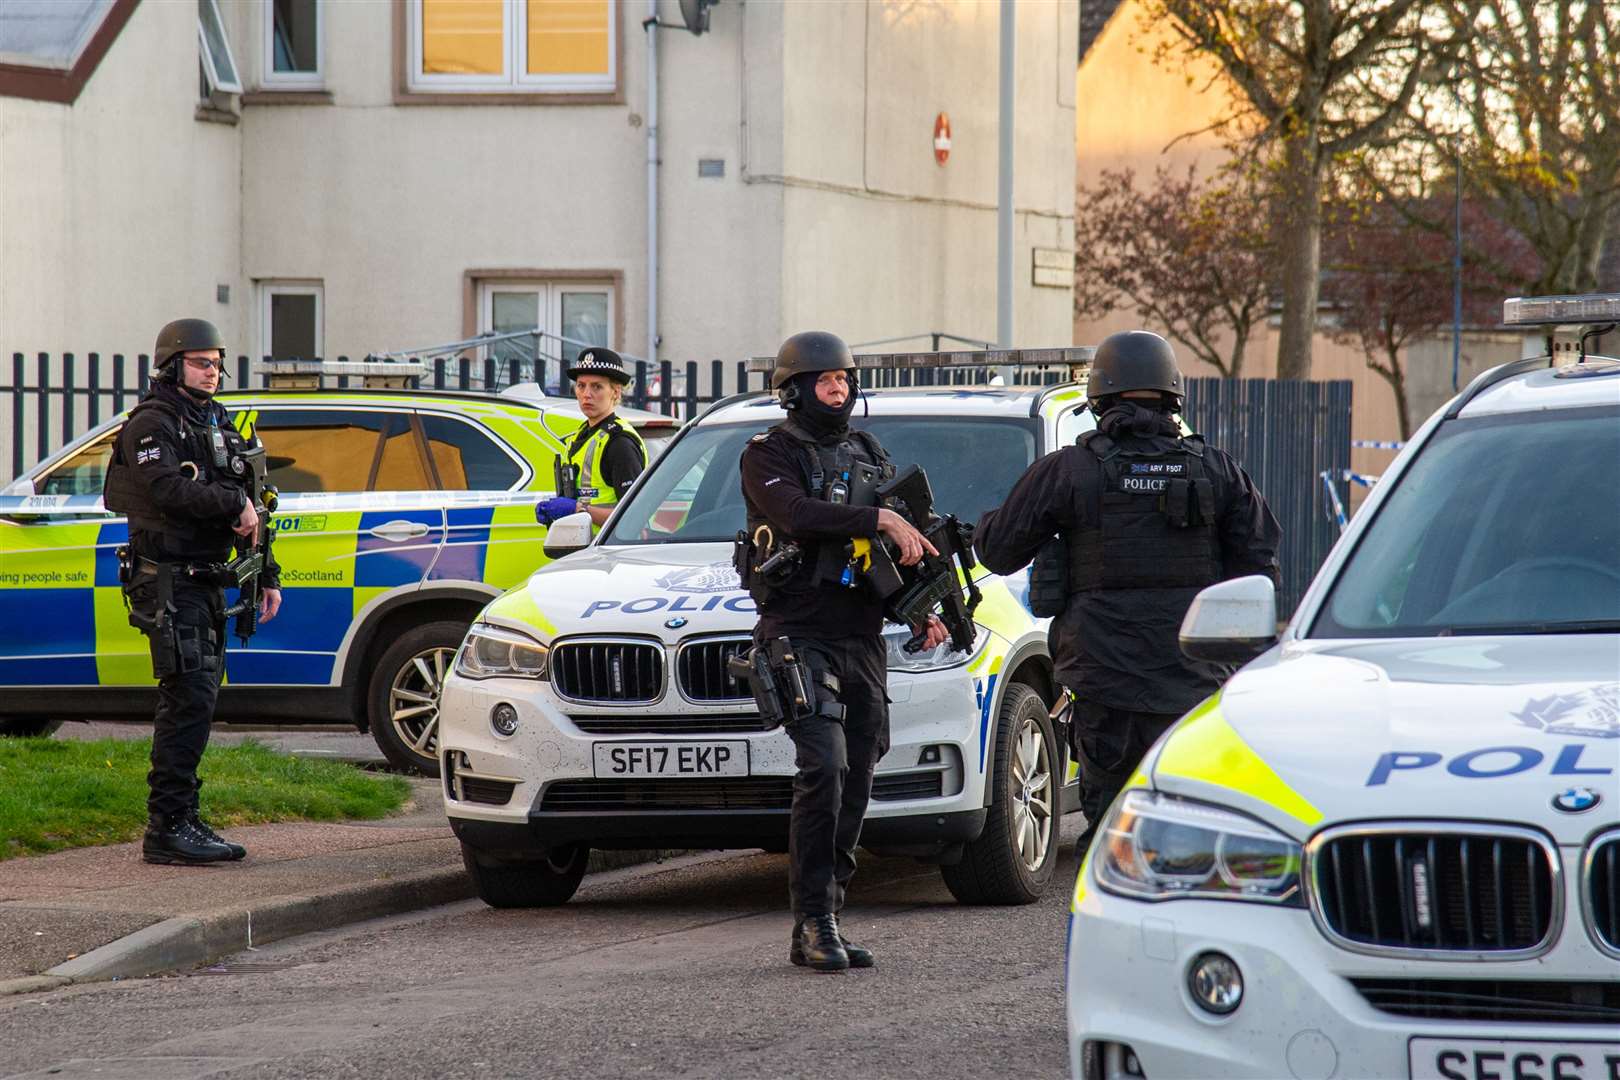 Armed police at the scene of the siege on April 23.